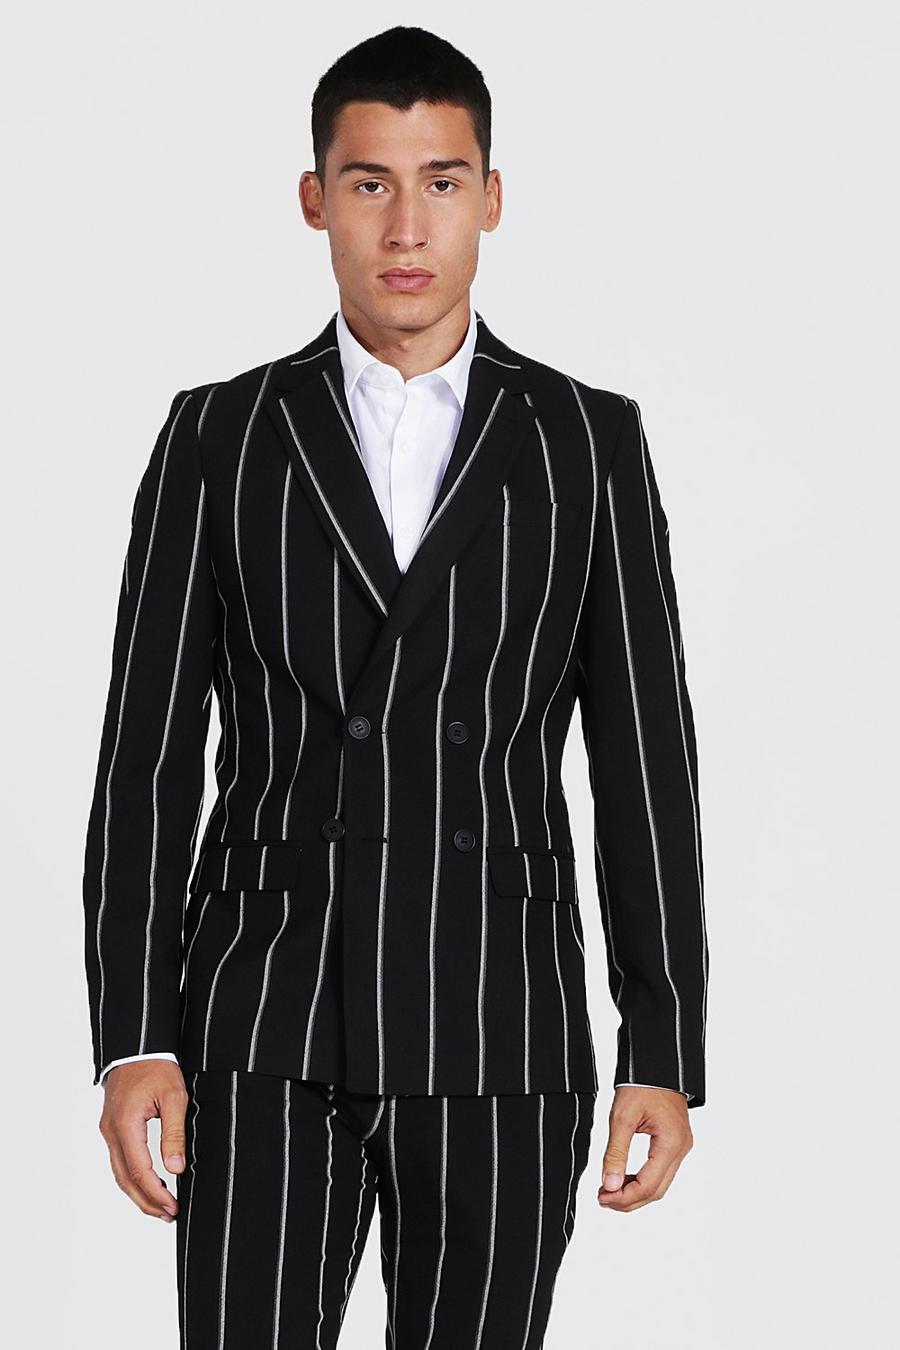 The classic pinstripe suit is making a comeback, The Independent